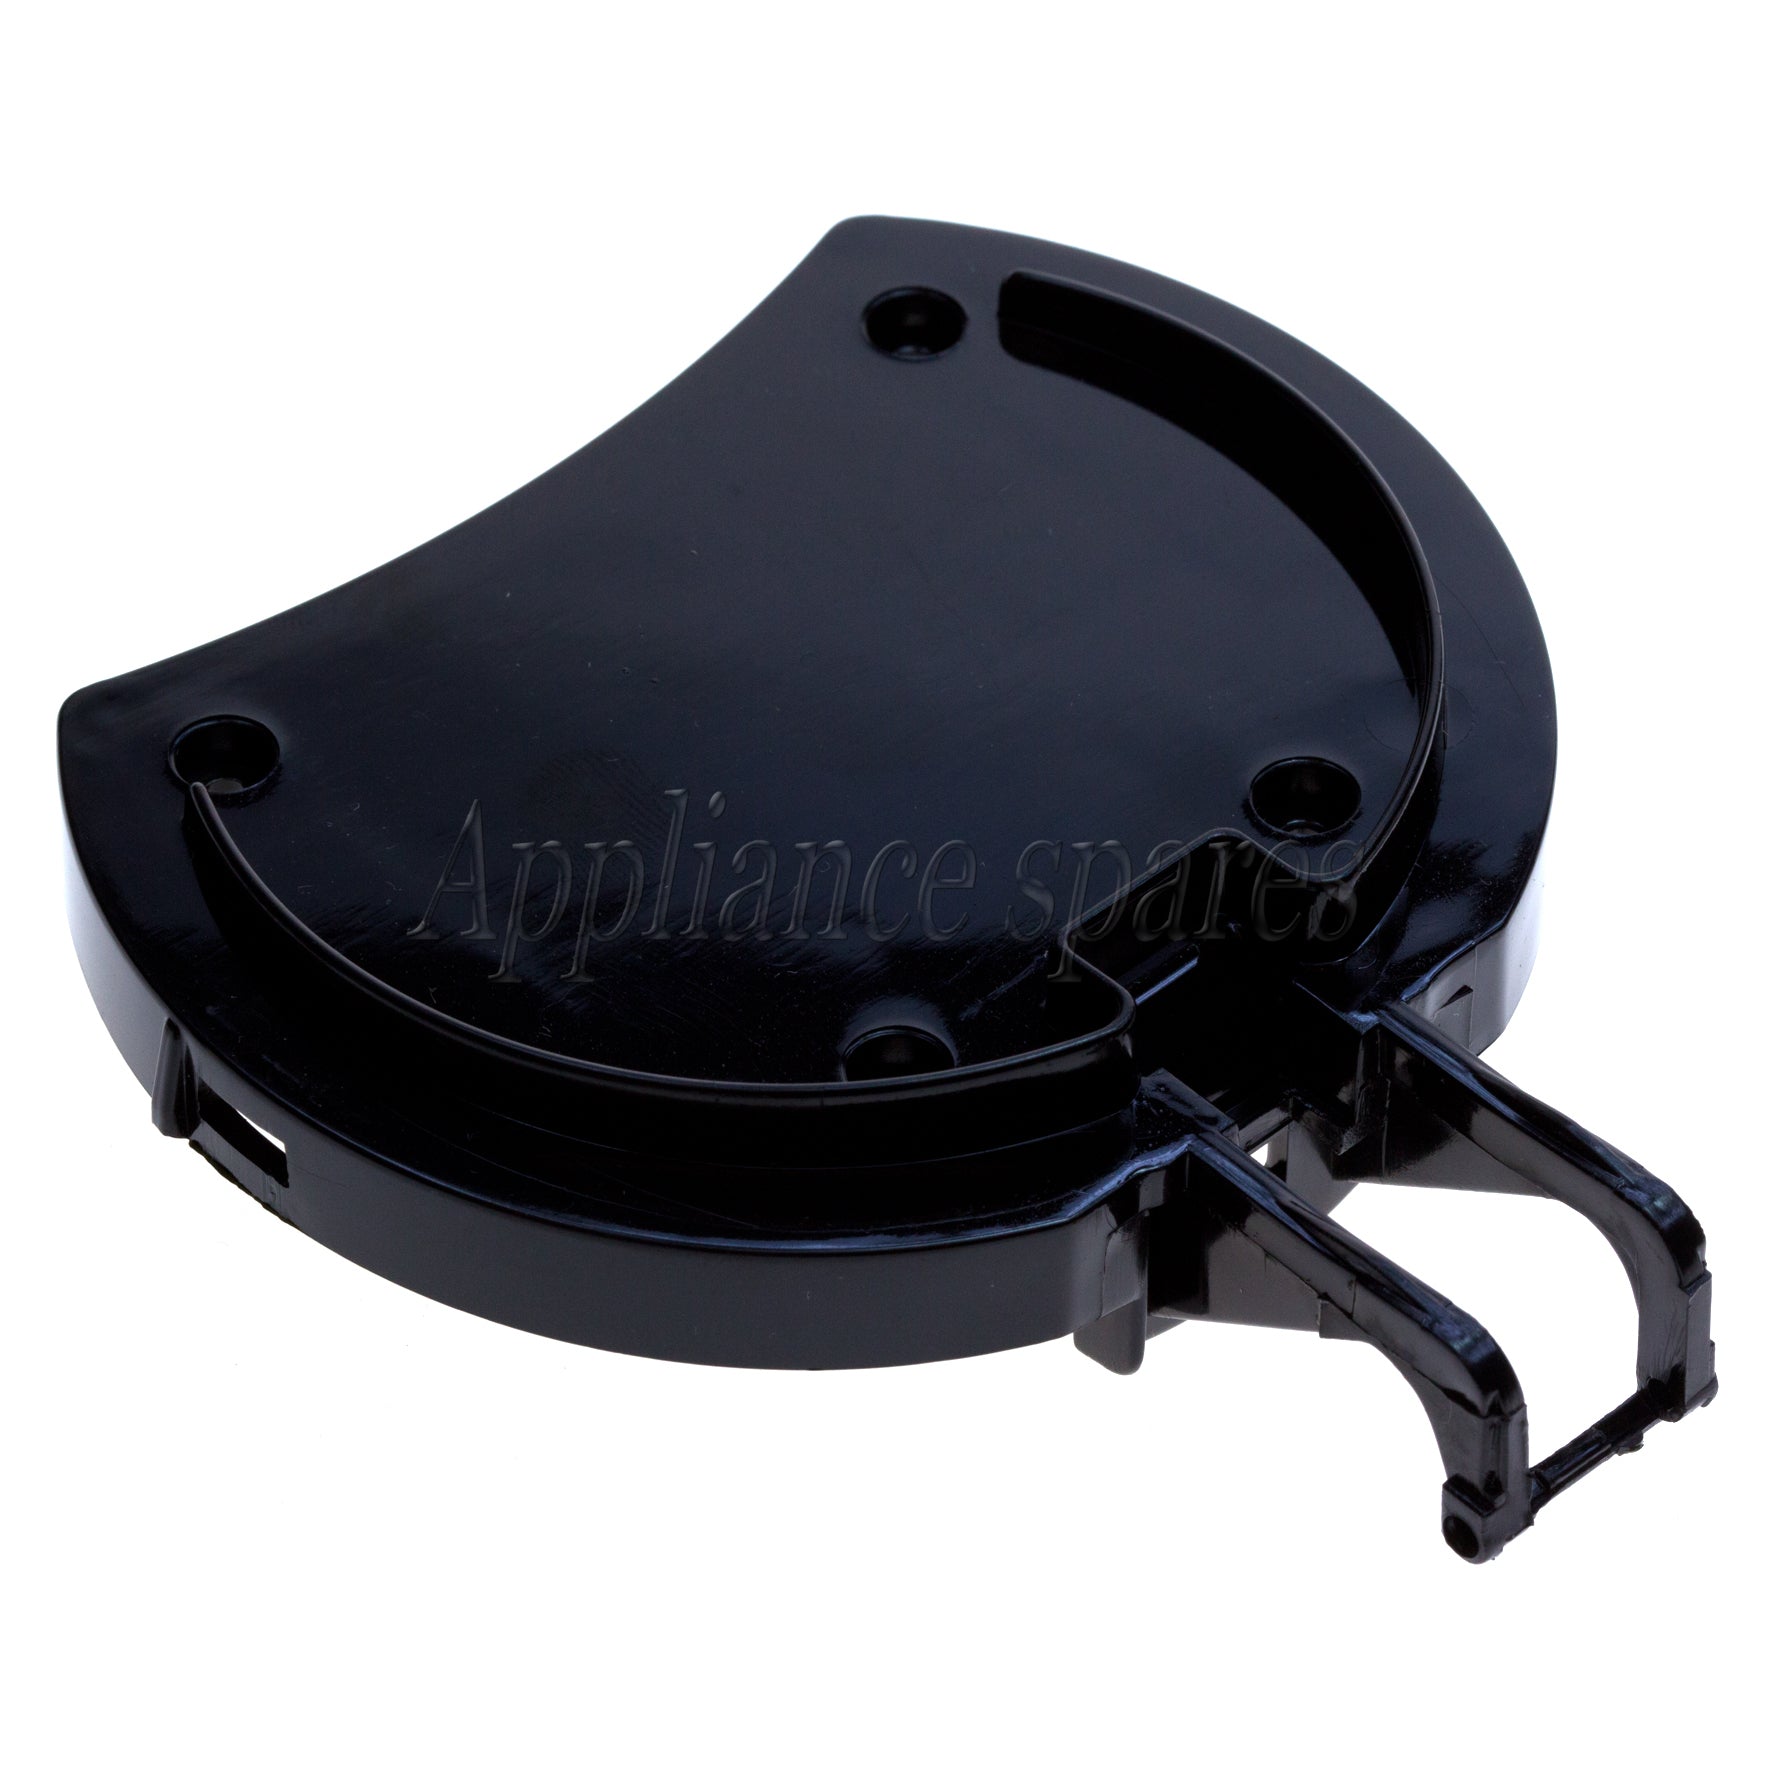 Russell Hobbs Kettle Lid Assembly